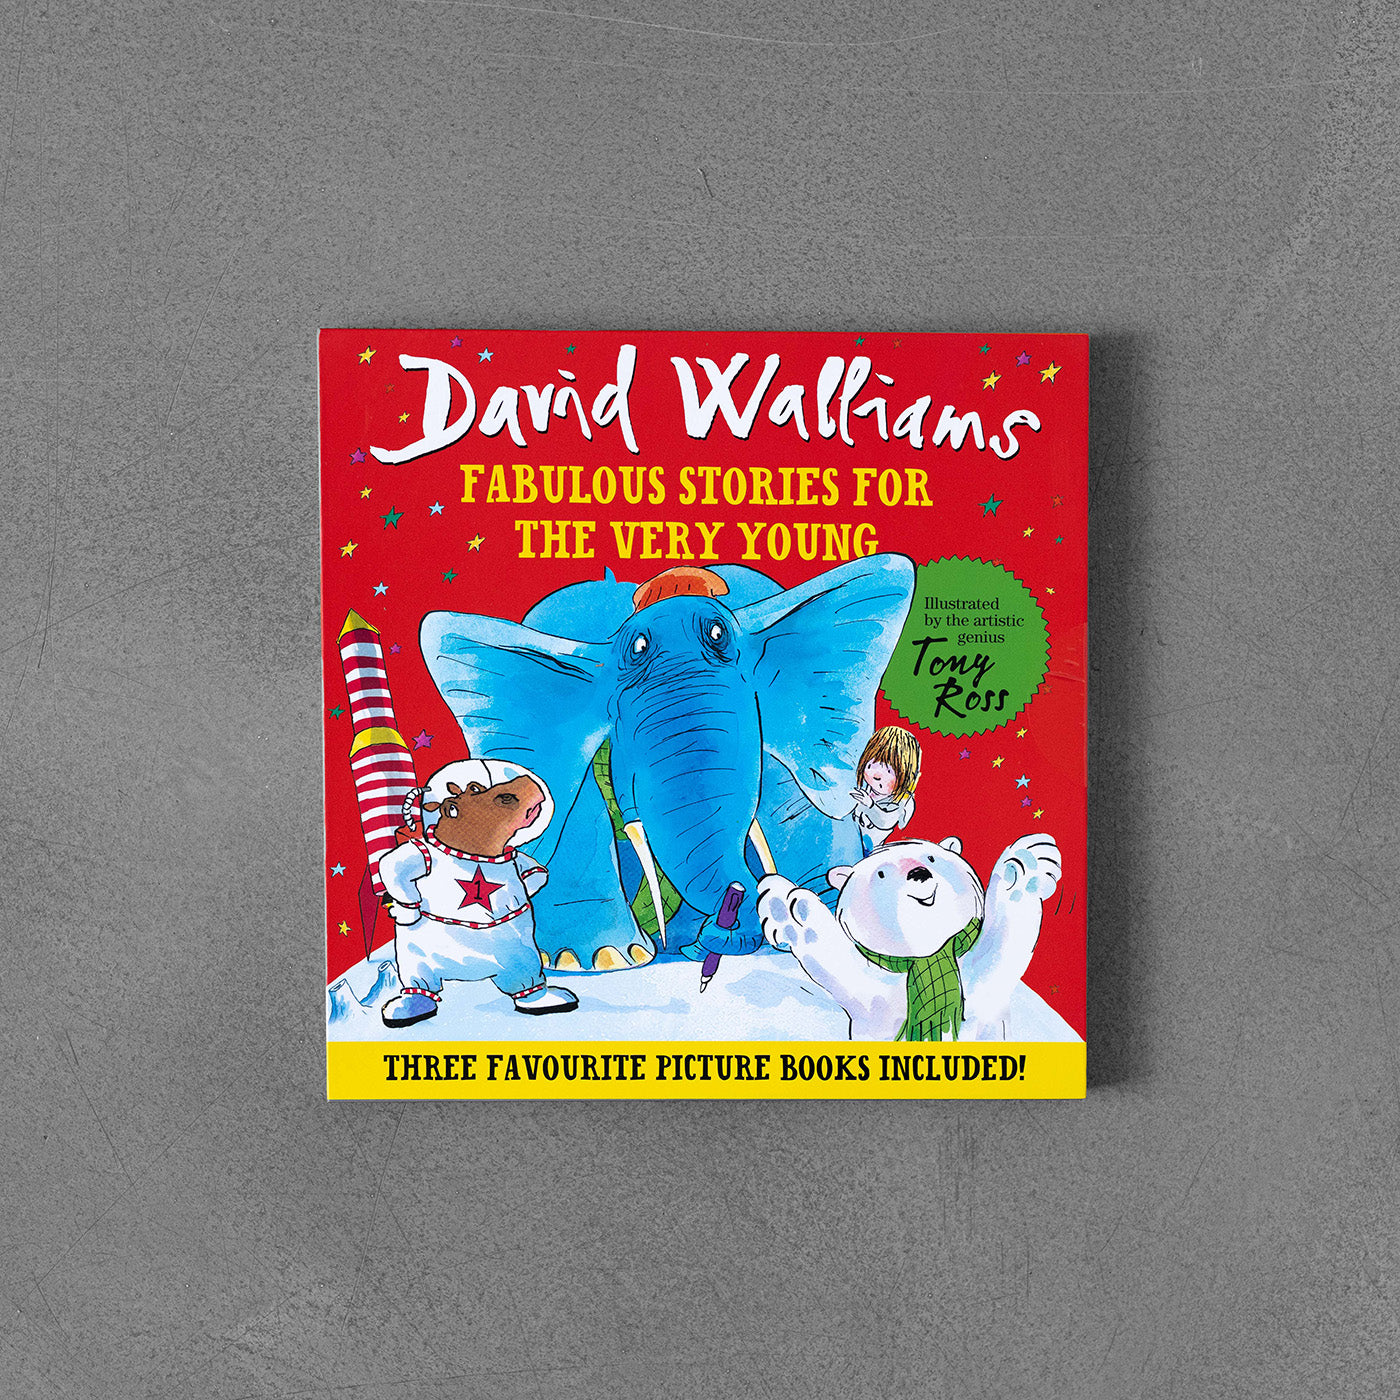 Fabulous Stories For The Very Young, David Walliams